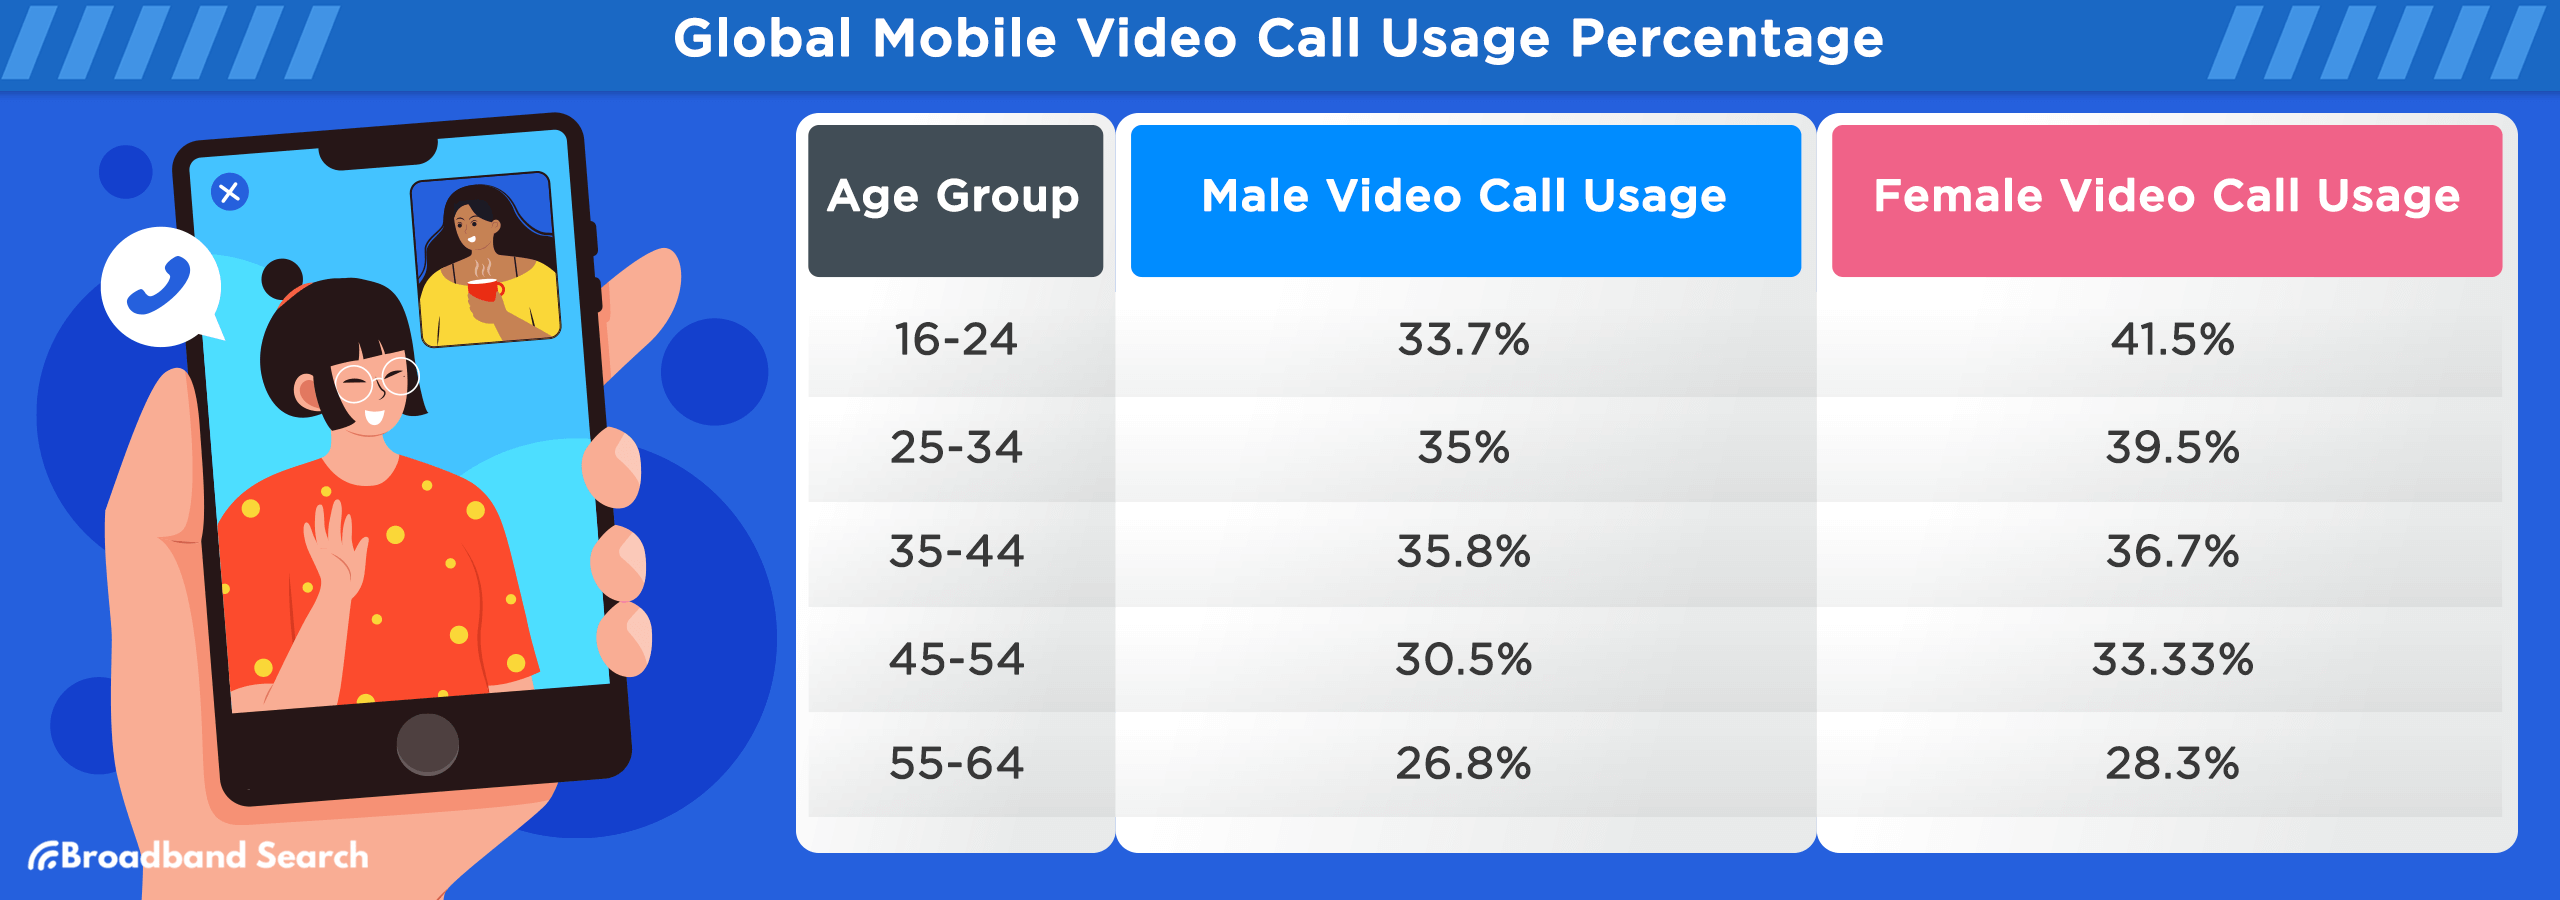 Global mobile video call usage percentage per age group and among men and women